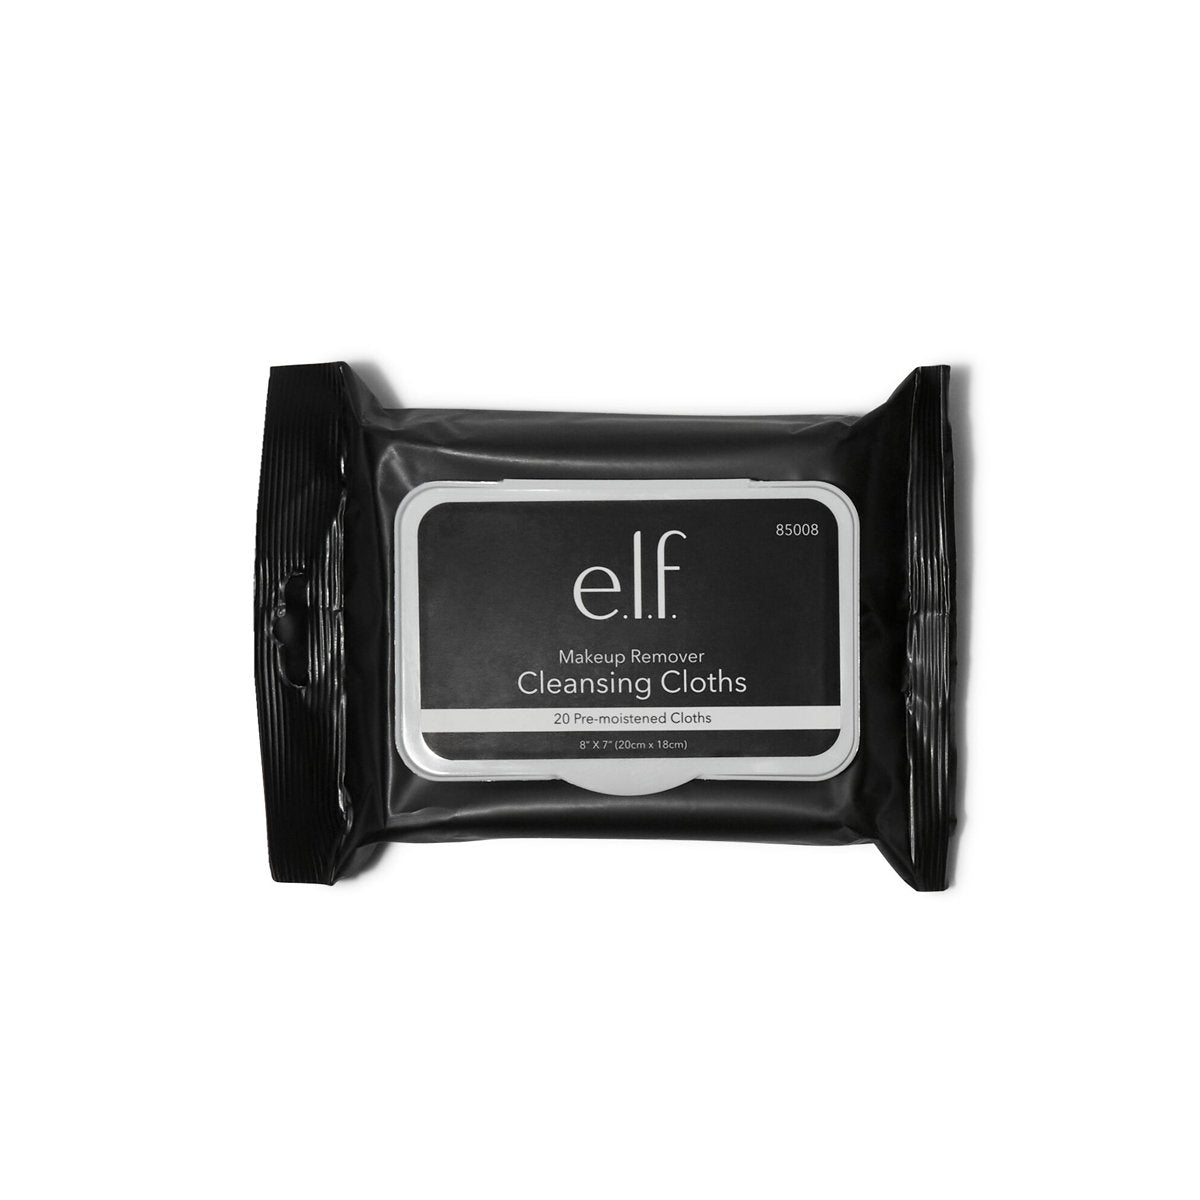 ELF Makeup Remover Cleansing Cloths